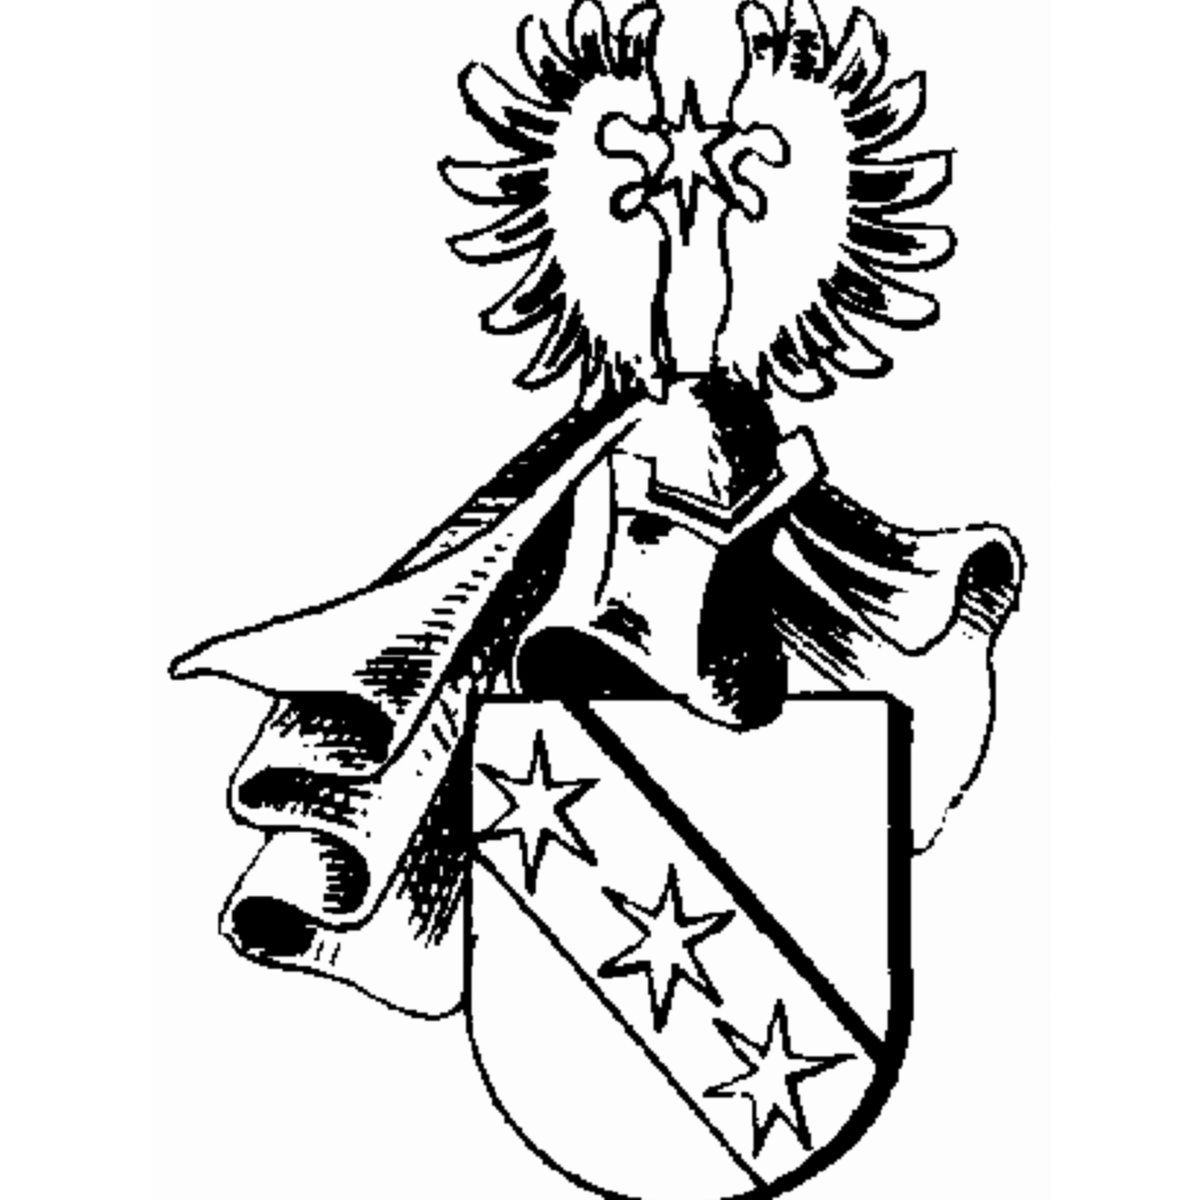 Coat of arms of family Ebenhöch